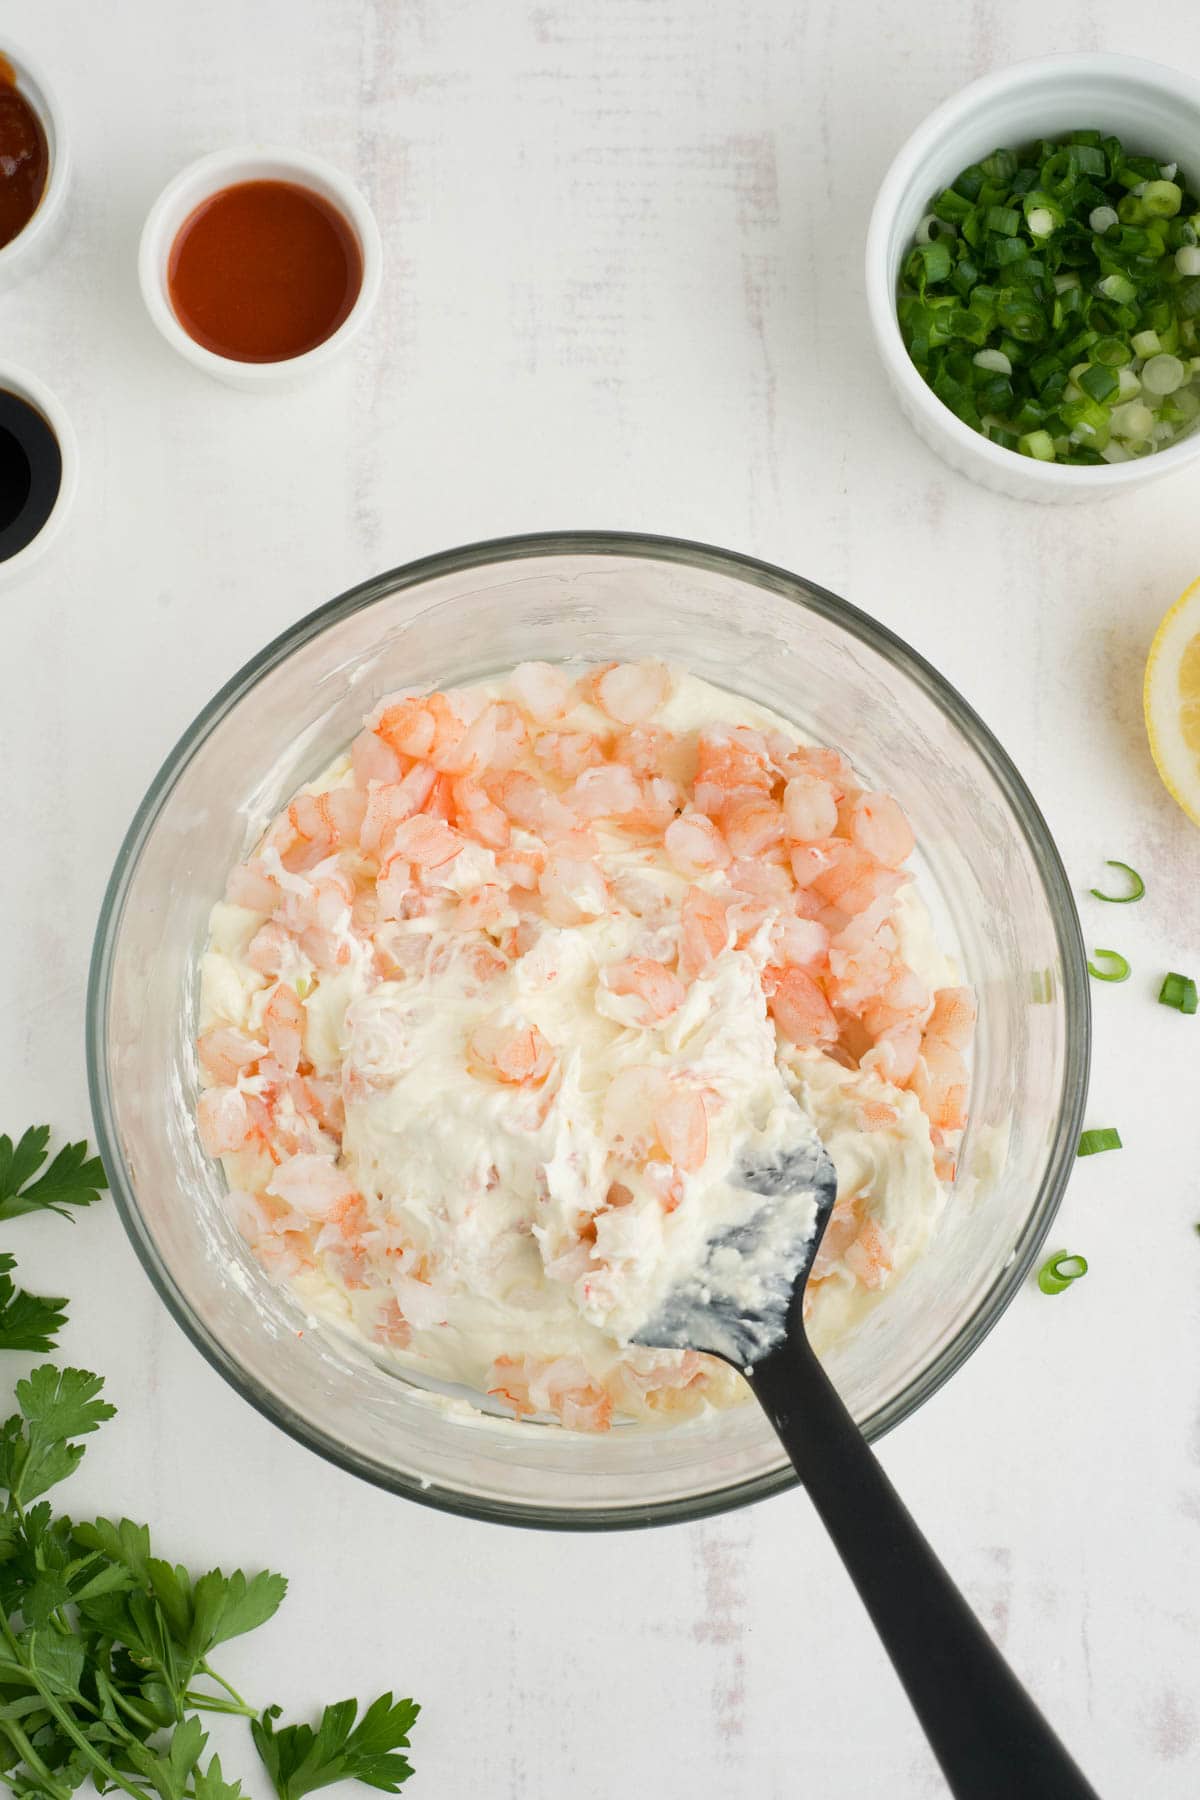 Chopped shrimp and cream cheese in a clear glass bowl with a black mixing spoon.